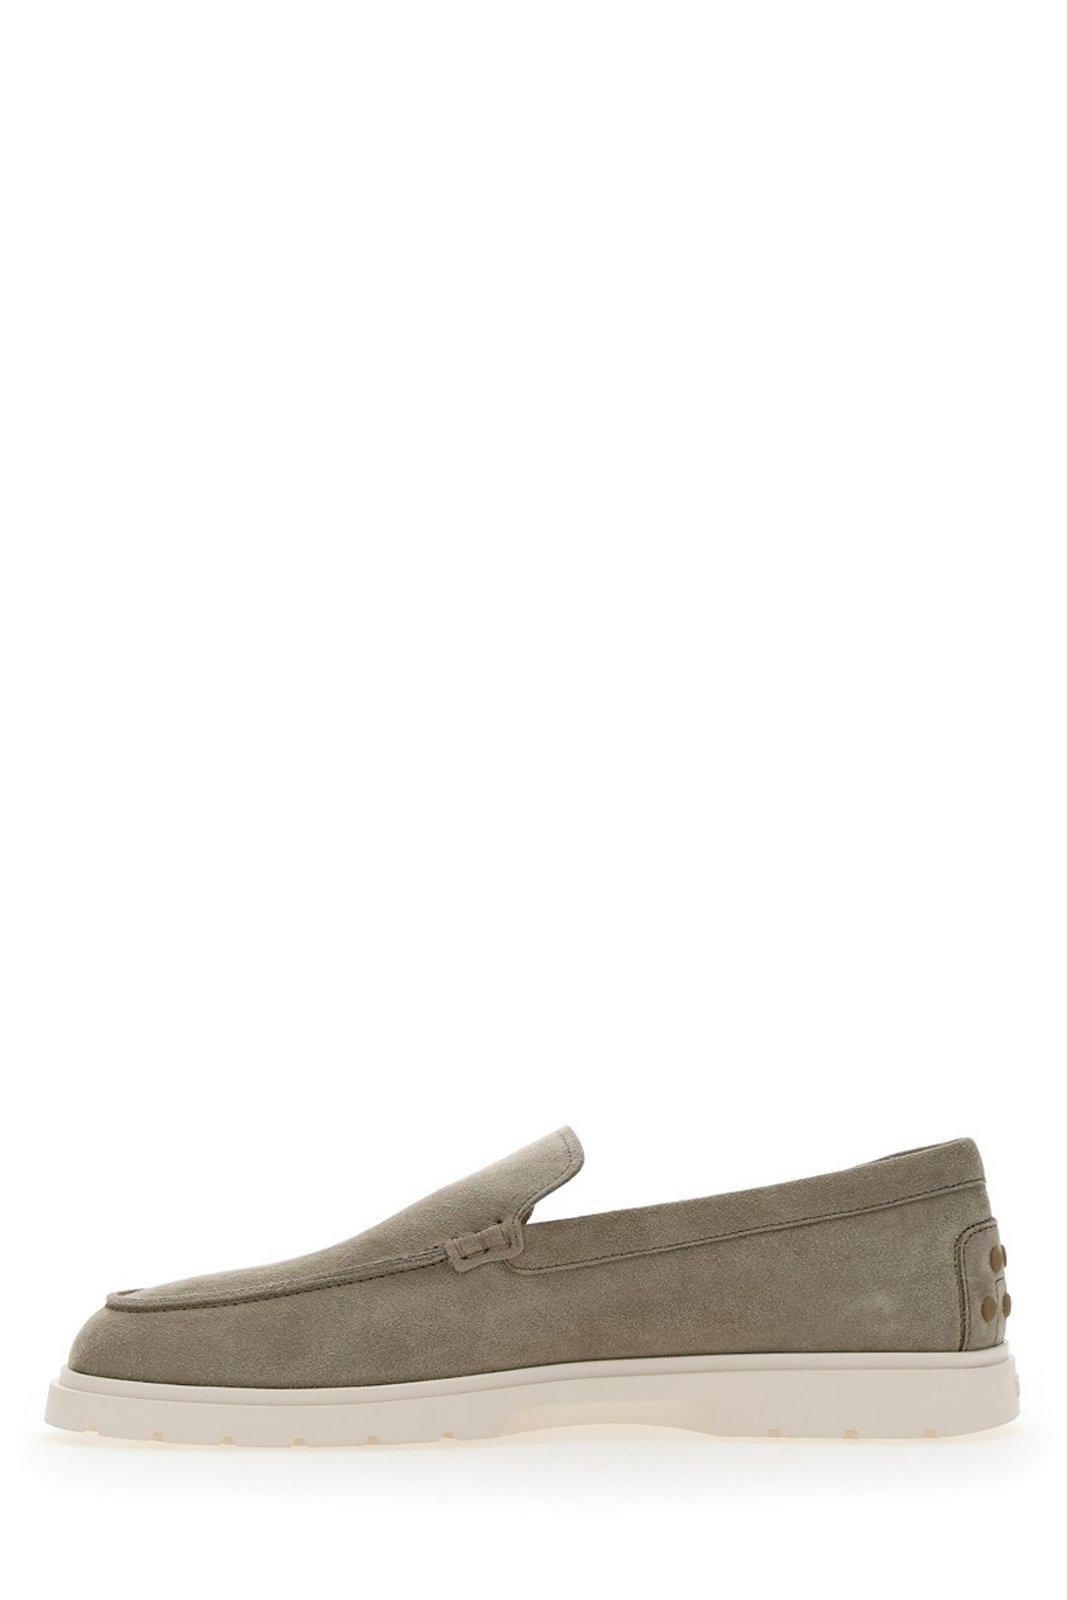 Shop Tod's Pointed Toe Loafers